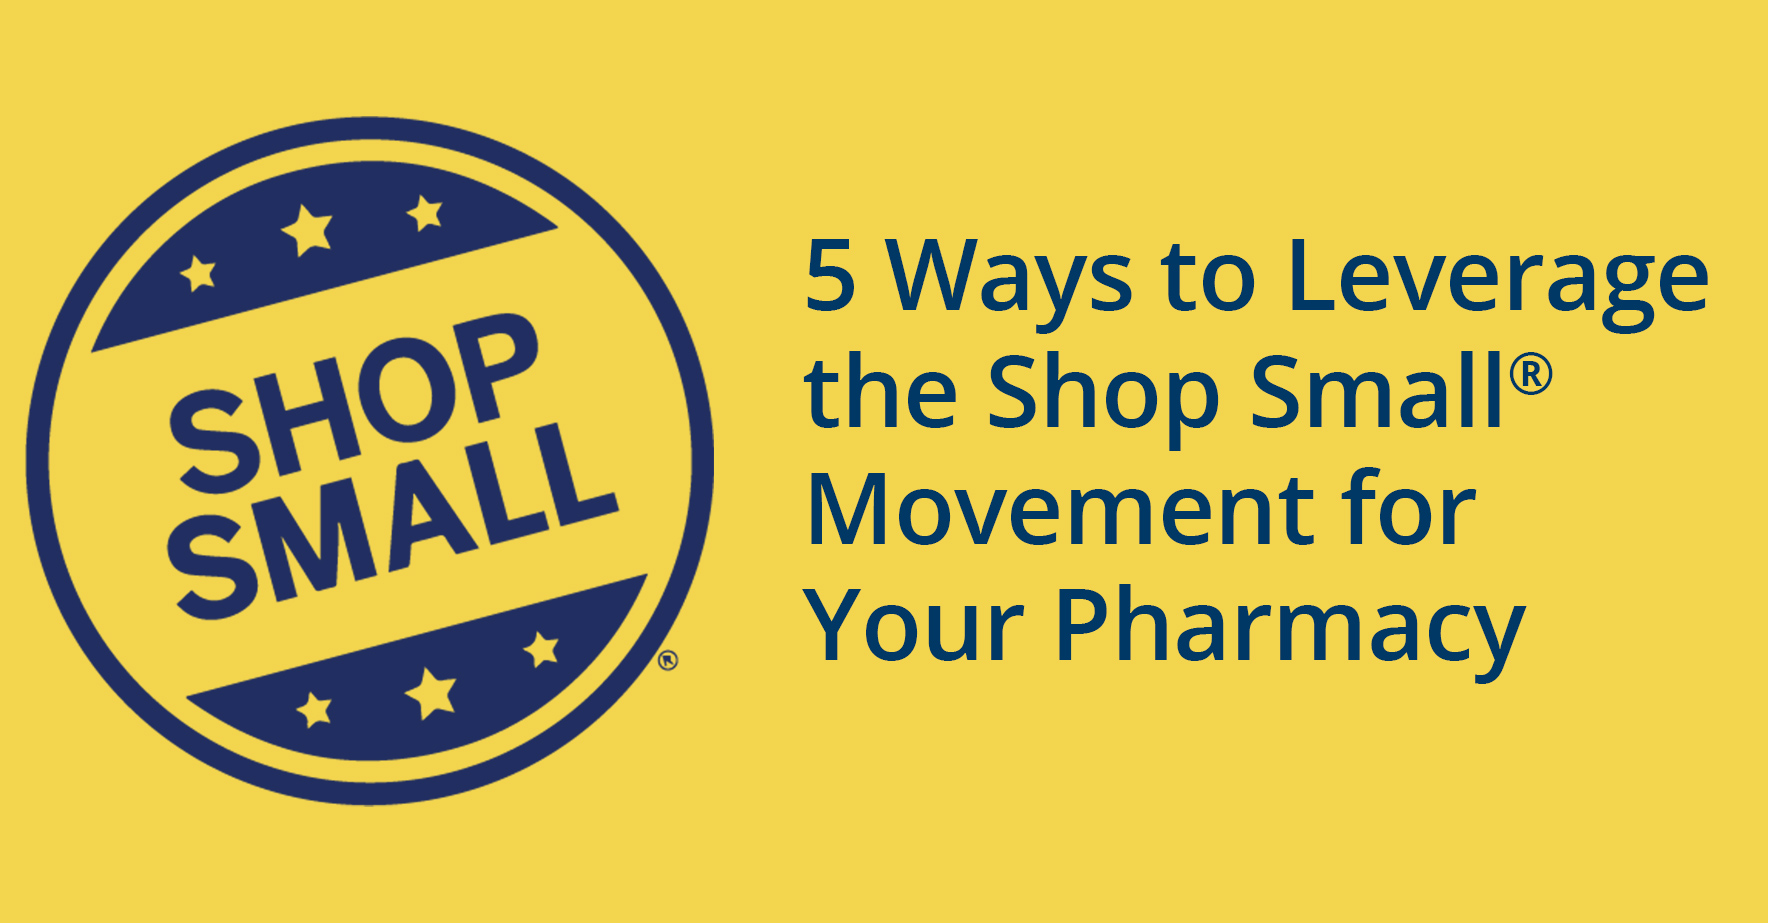 5_ways_to_leverage_the_shop_small_movement_for_your_pharmacy.jpg.jpg.